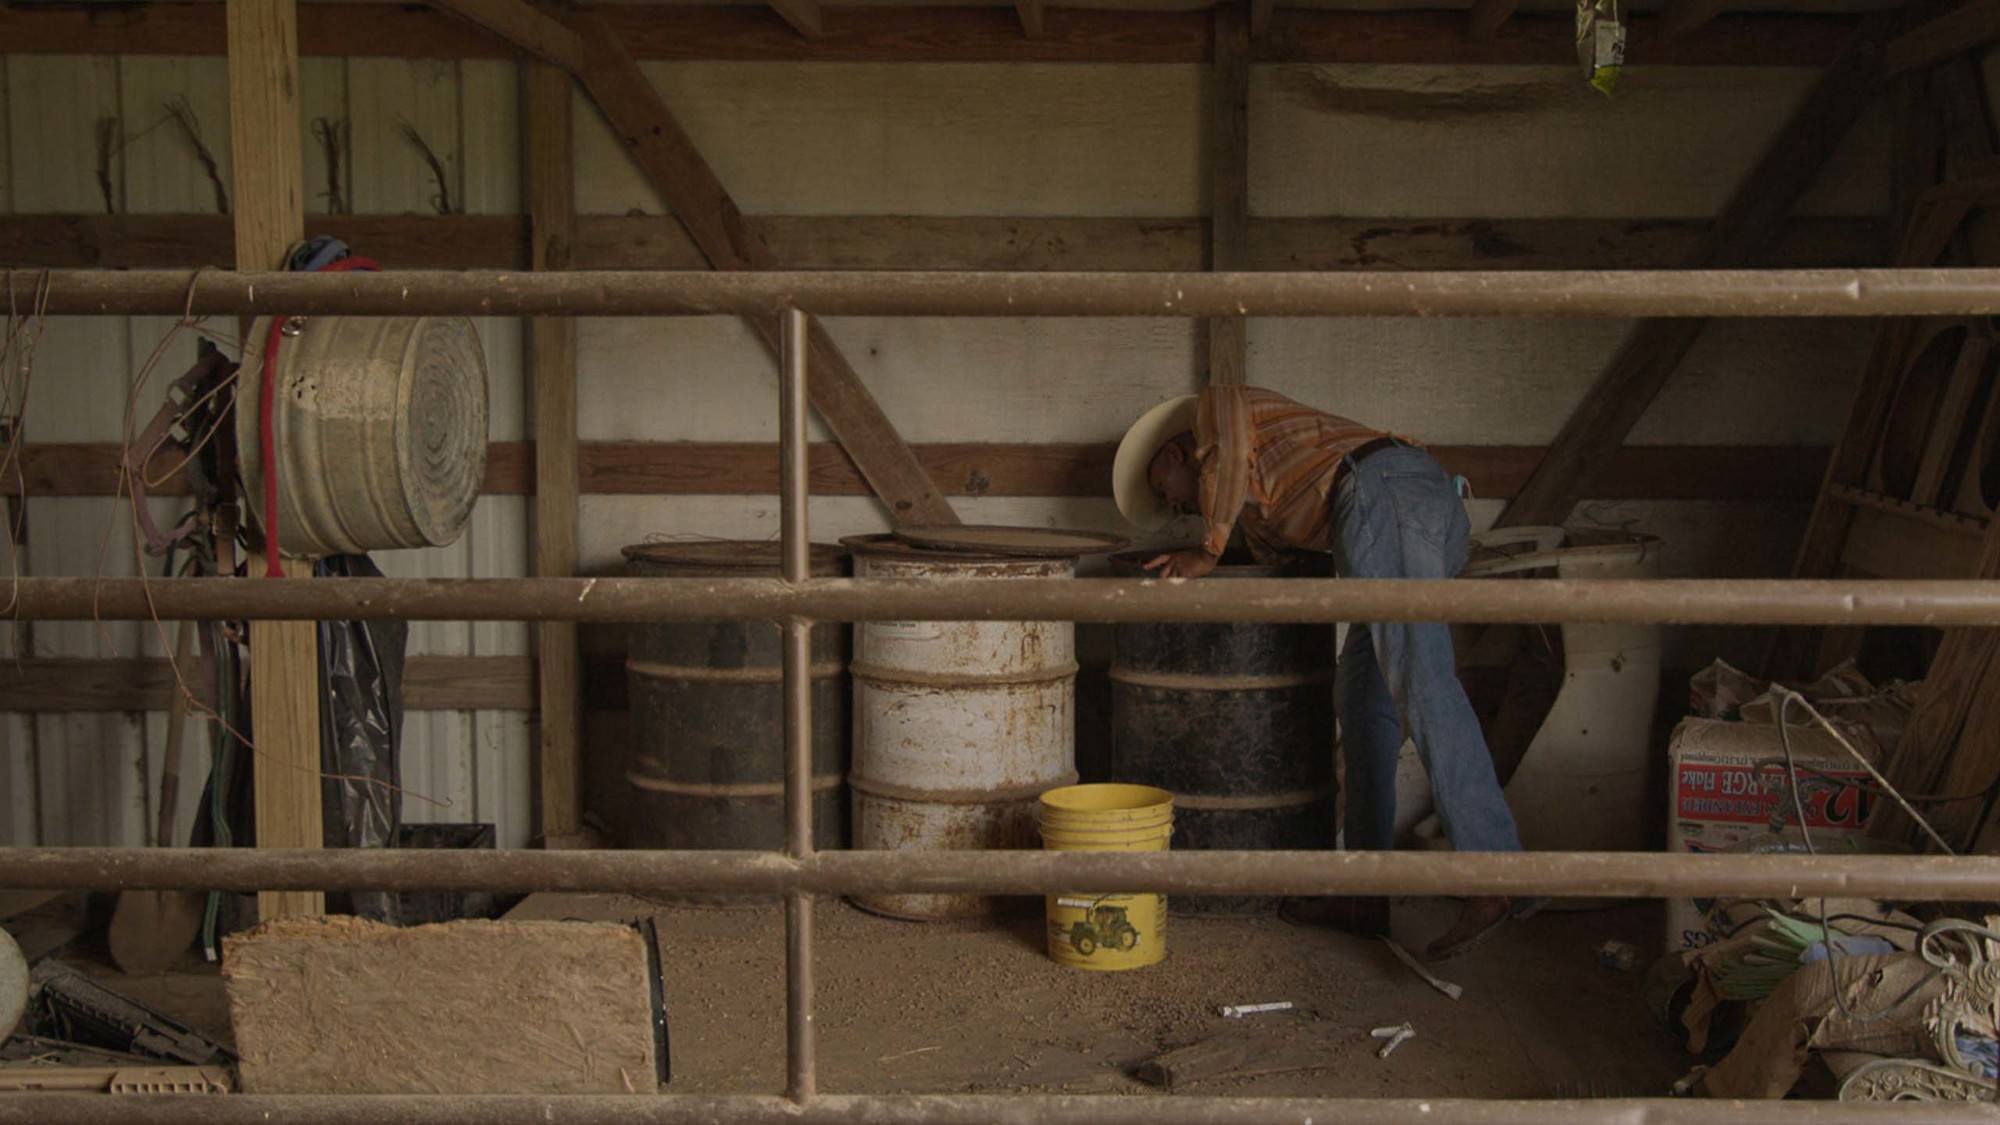 Eddie Jones reaching for feed to for his horses in stable in East Texas. September 2020